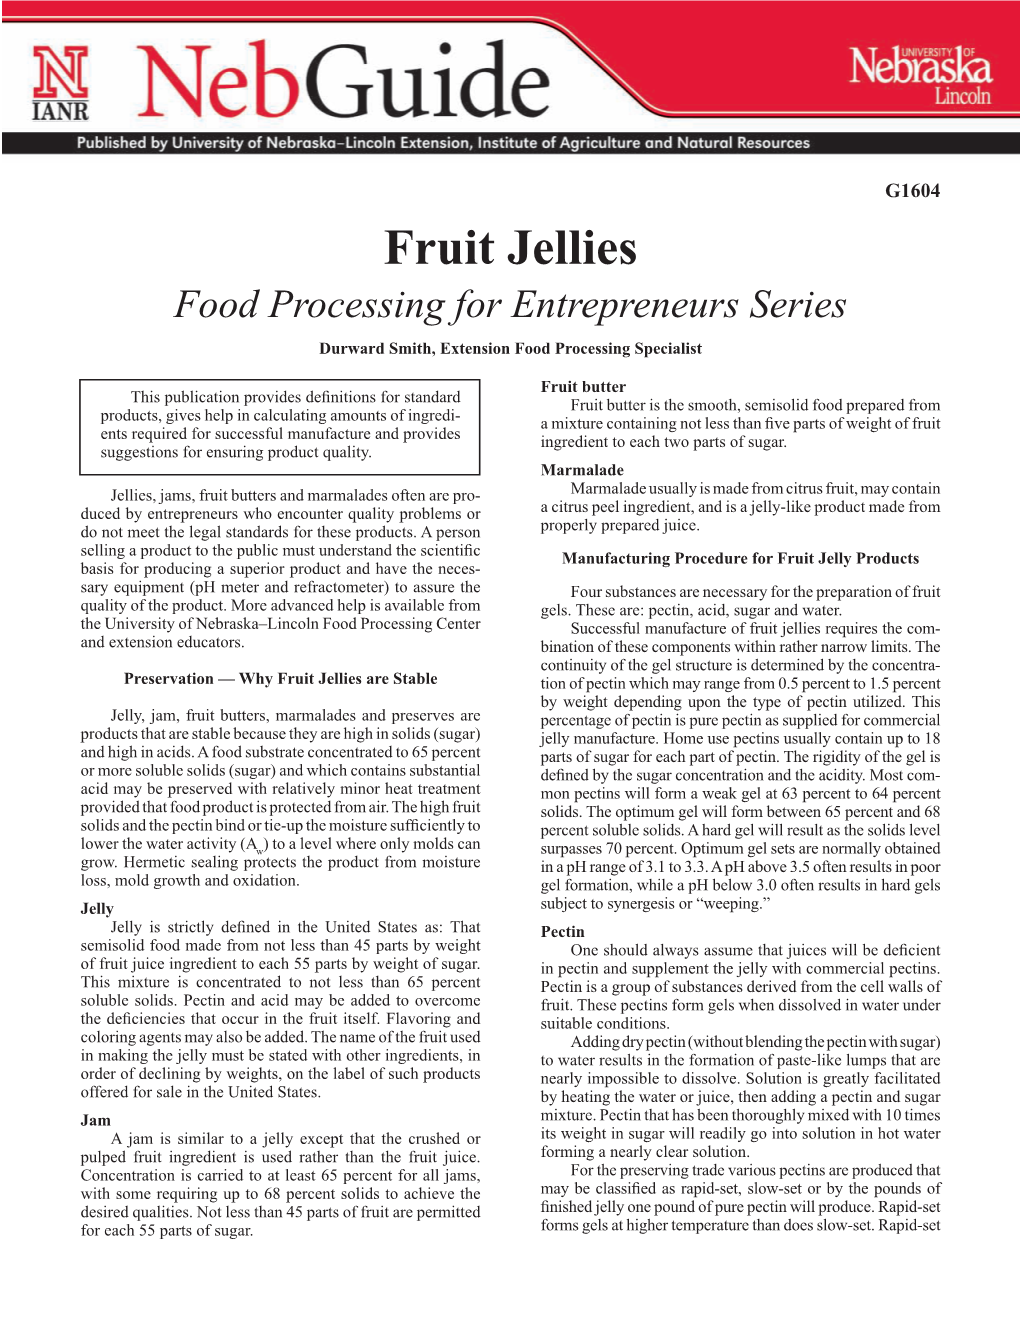 Fruit Jellies Food Processing for Entrepreneurs Series Durward Smith, Extension Food Processing Specialist